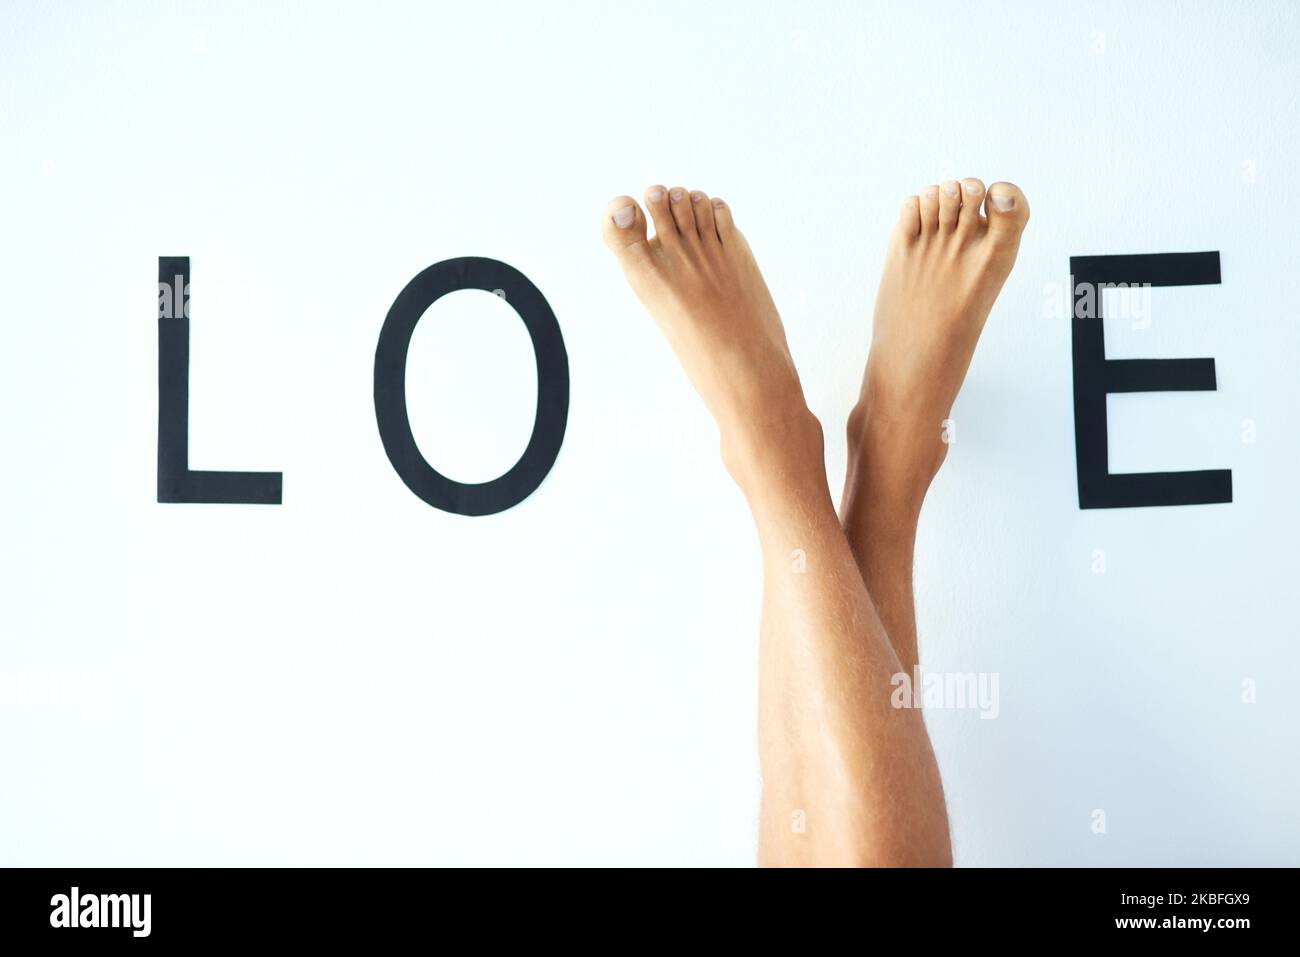 Walk in the path of love. Studio shot of an unrecognizable mans crossed legs with his feet forming the letter V in the word LOVE. Stock Photo